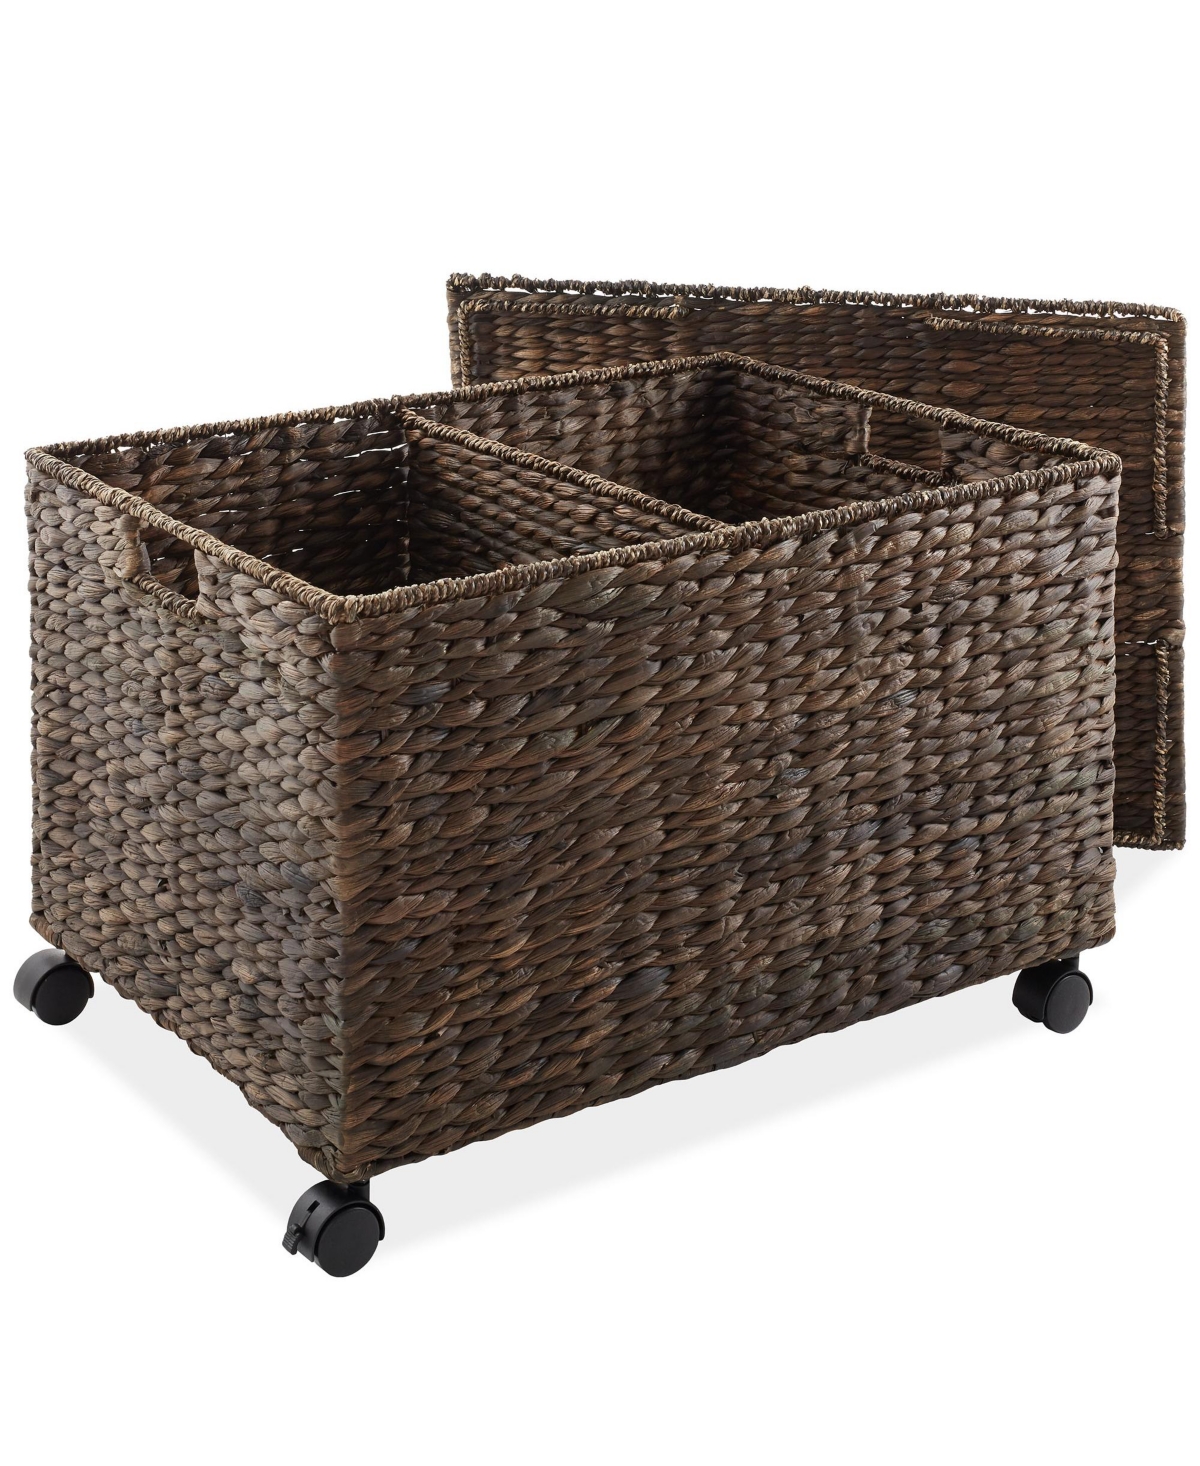 Rolling Storage Basket Cart with Lid and Wheels, Natural - Woven Water Hyacinth Divided Sorting Bin for Kitchen, Pantry, Laundry, Garage - E